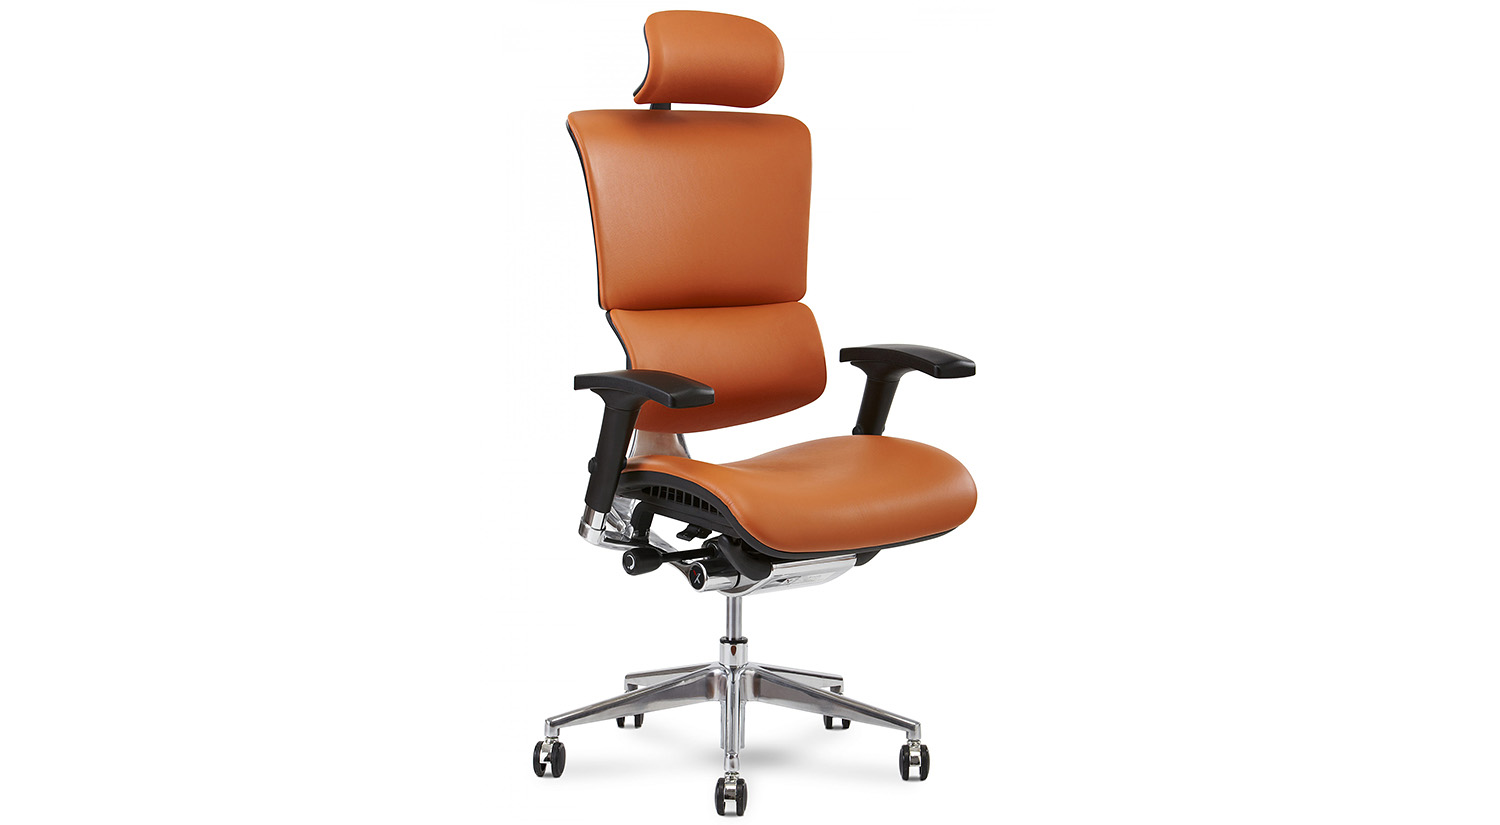 Circle Furniture - X-Chair Review: Features, Benefits, Cost, and More